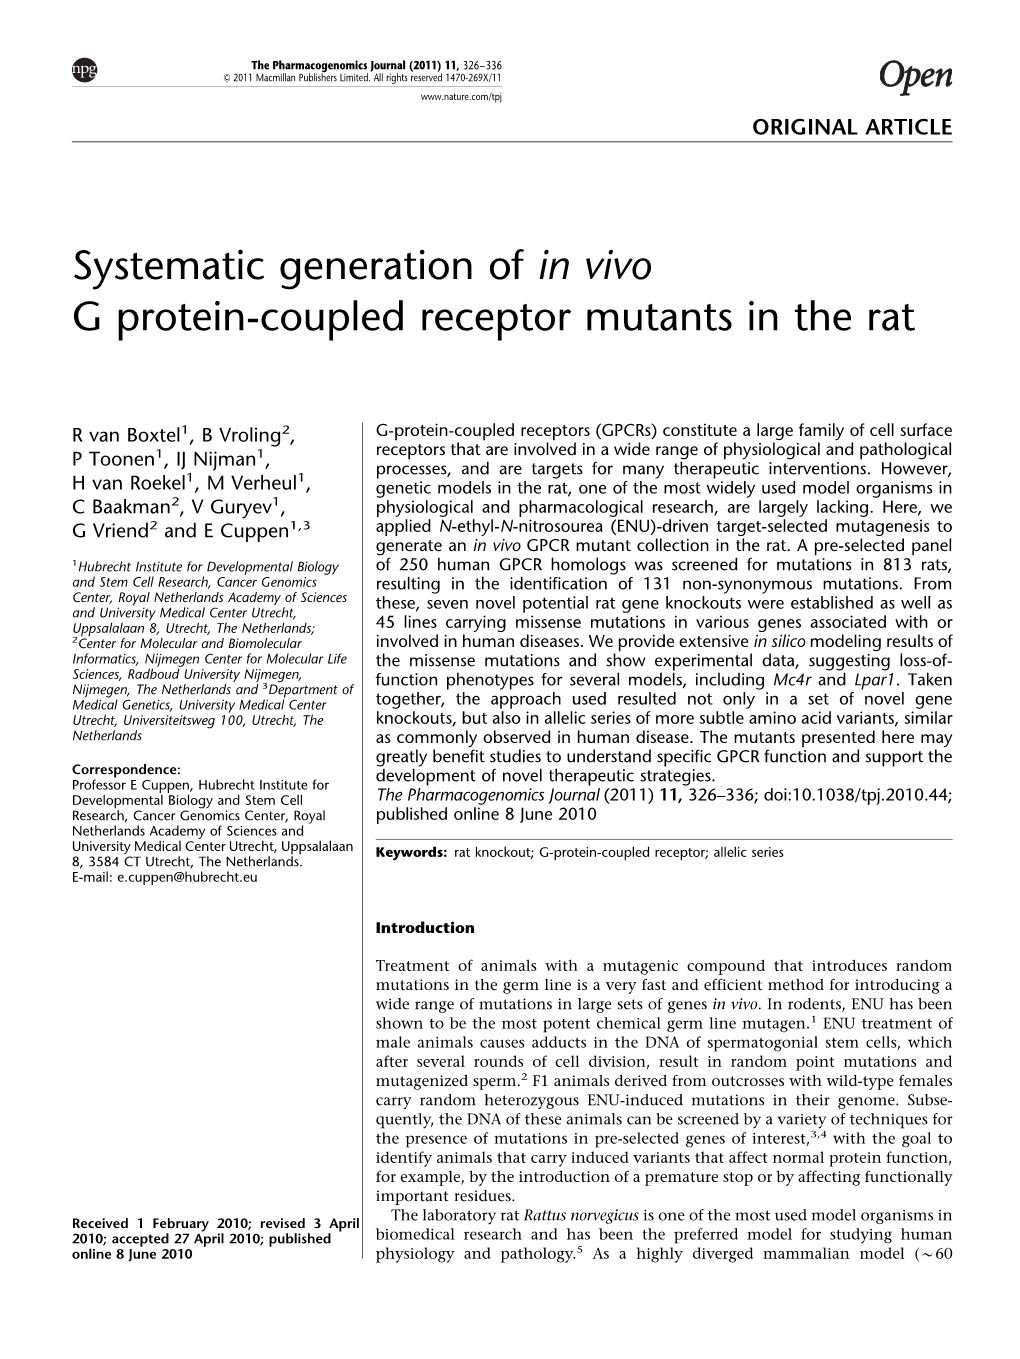 Systematic Generation of in Vivo G Protein-Coupled Receptor Mutants in the Rat